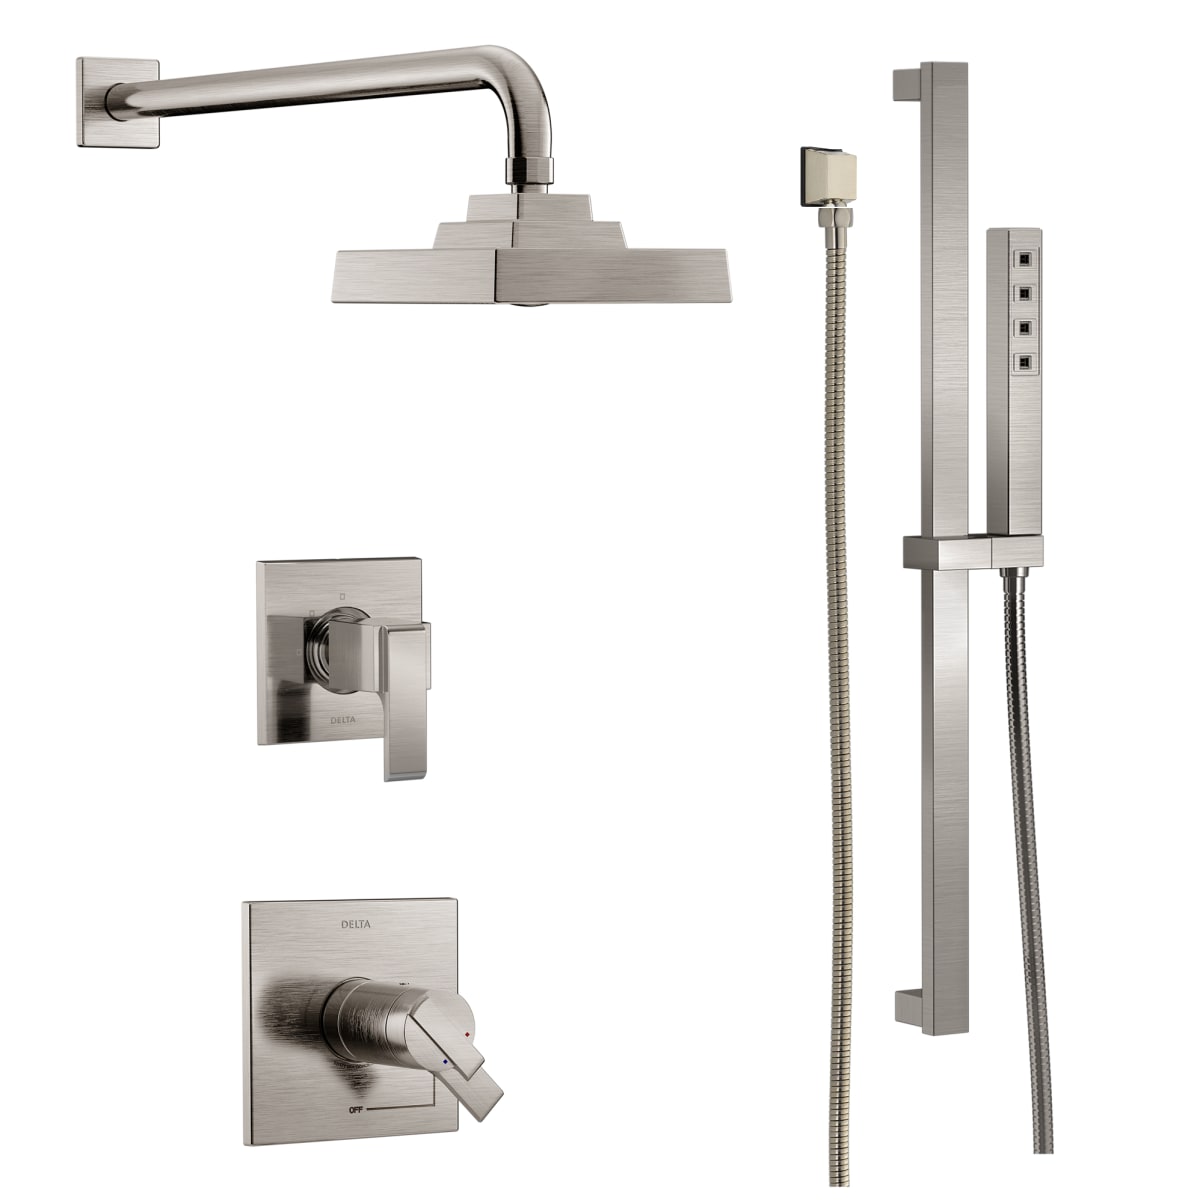 Delta DSS-Pivotal-17T01-BL Matte Black TempAssure 17T Series Thermostatic  Shower System with Integrated Volume Control, Shower Head, and Hand Shower  - Includes Rough-In Valves 